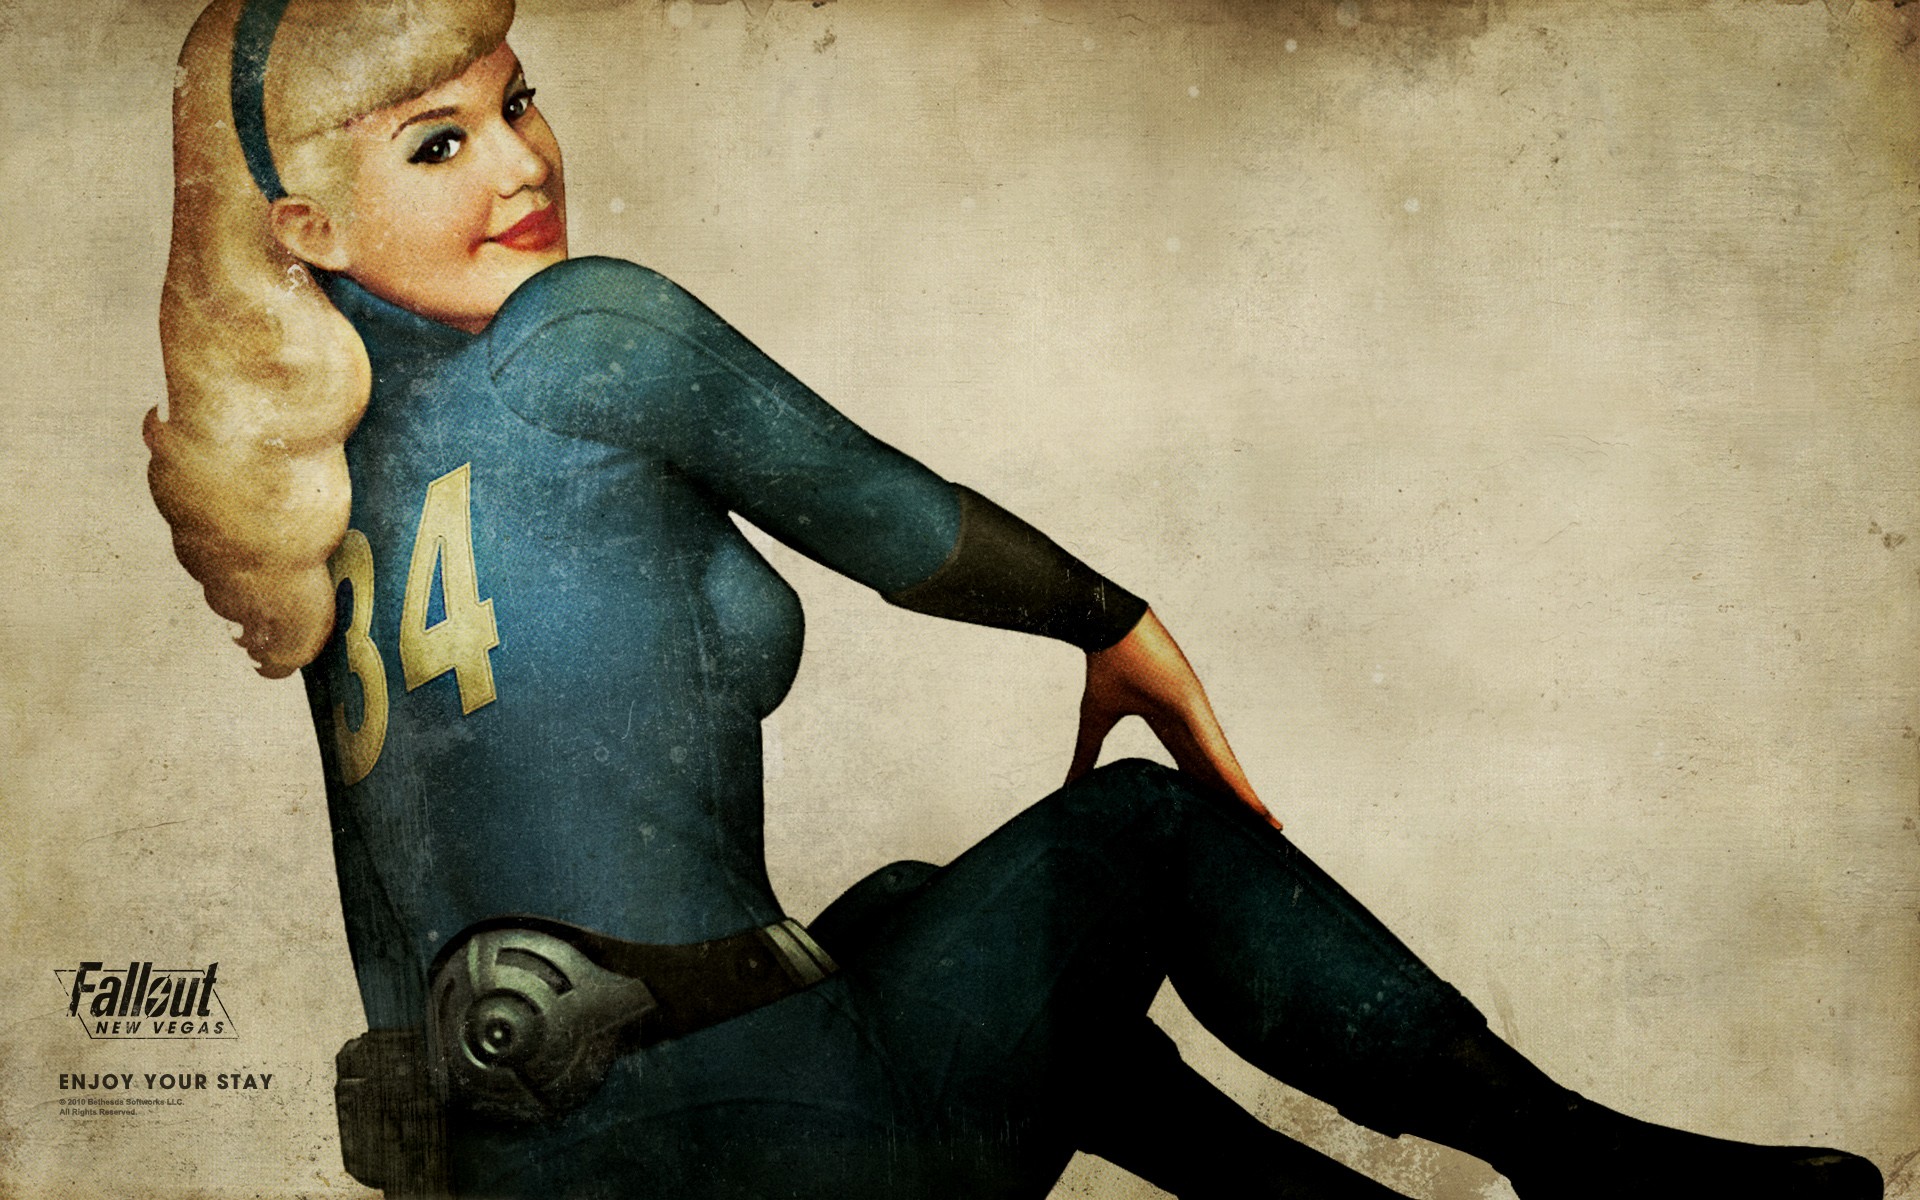 Fallout Simple Background Fallout New Vegas Numbers Video Games Obsidian 1920x1200